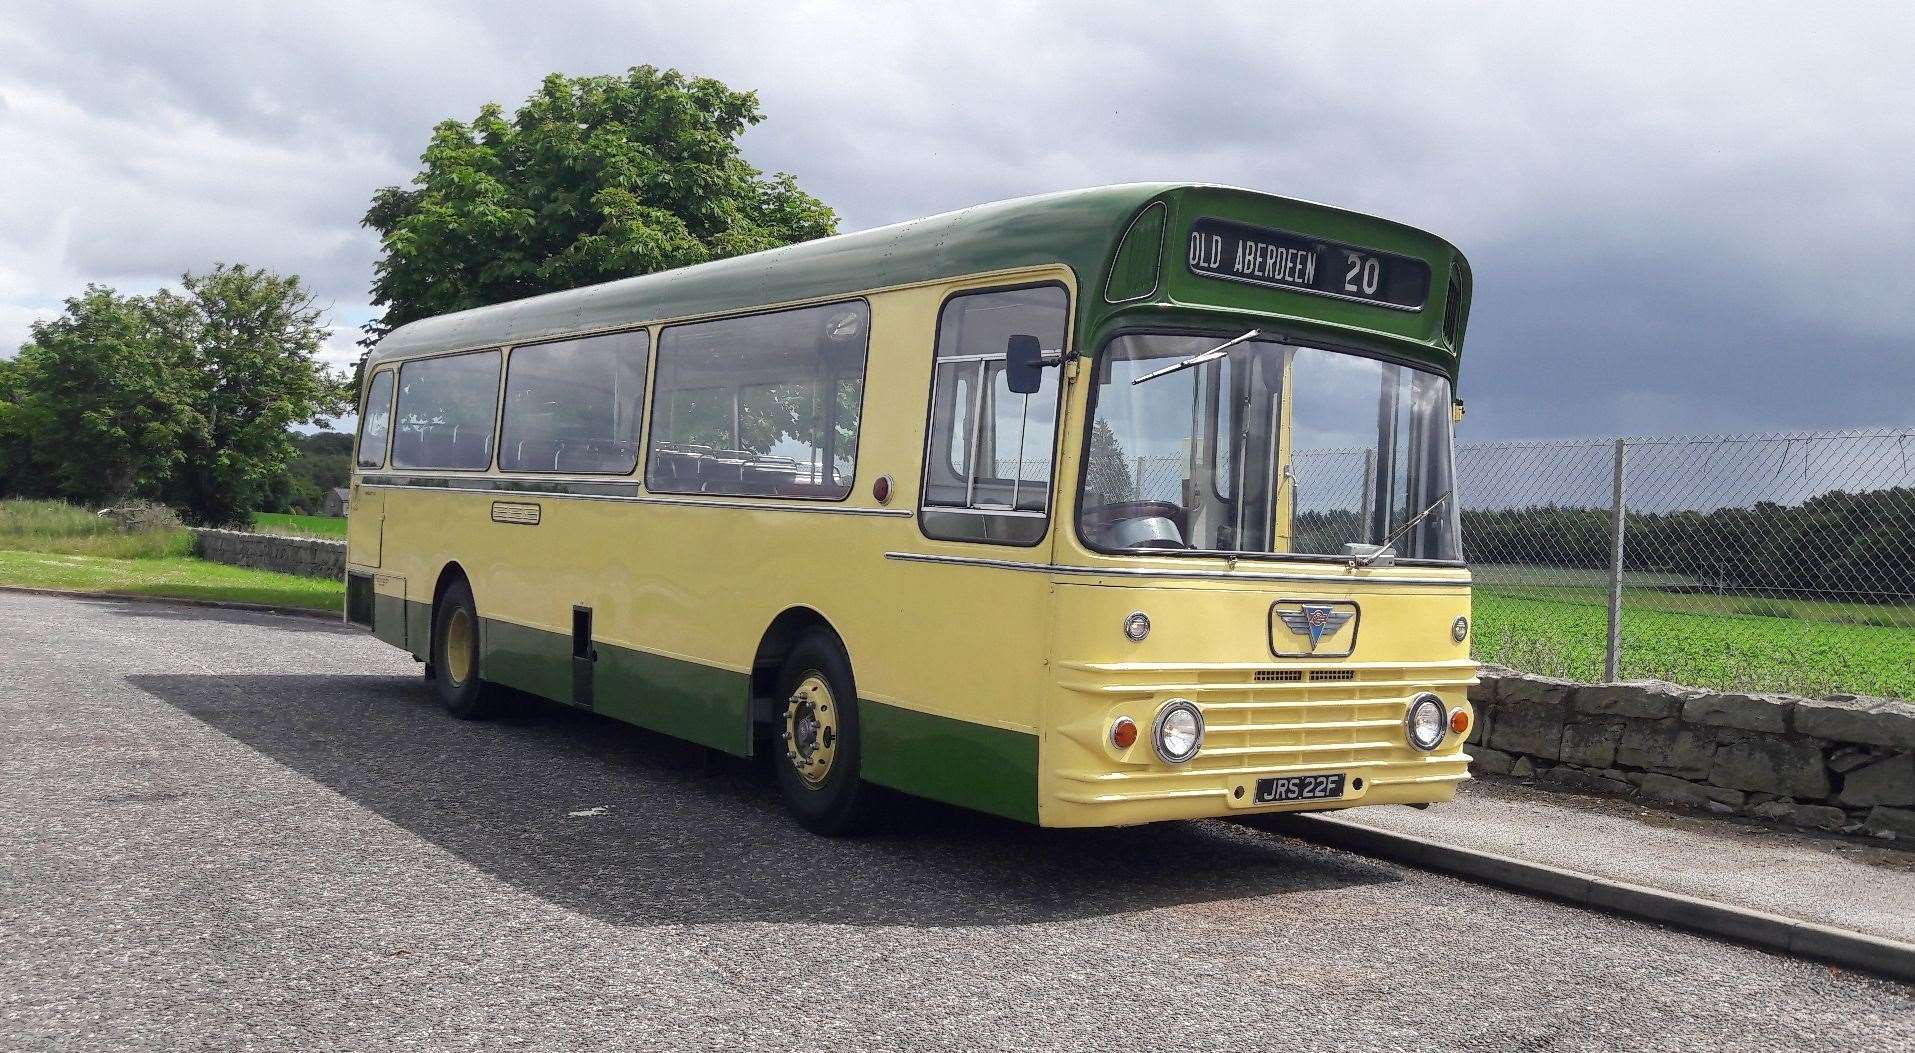 The 1972 AEC ‘Swift’, with body by Alexanders of Falkirk, will be giving free trips around the village of Alford.